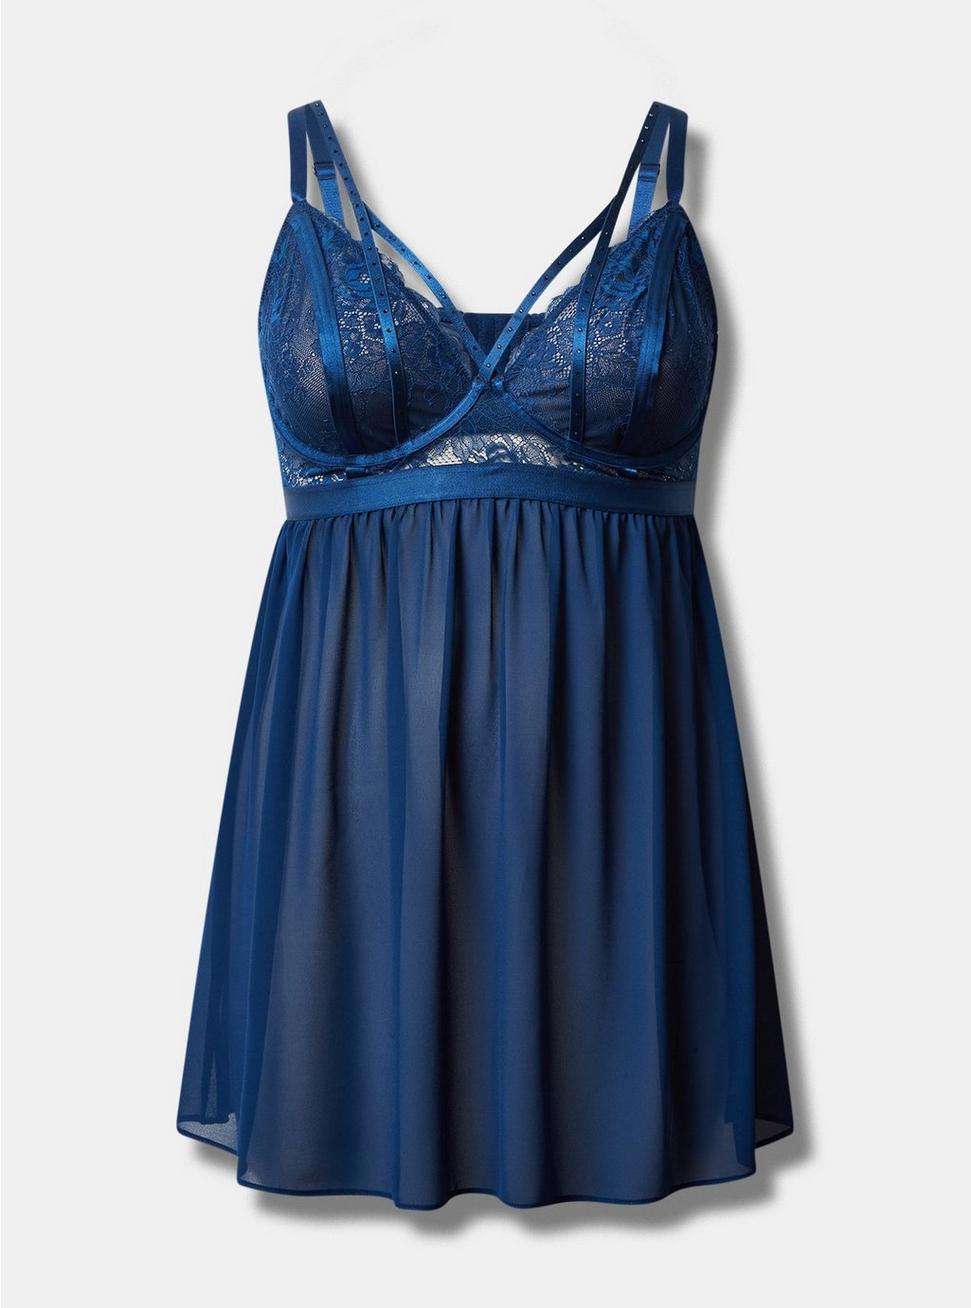 Plus Size Strappy Studded Lace Babydoll, ESTATE BLUE, hi-res